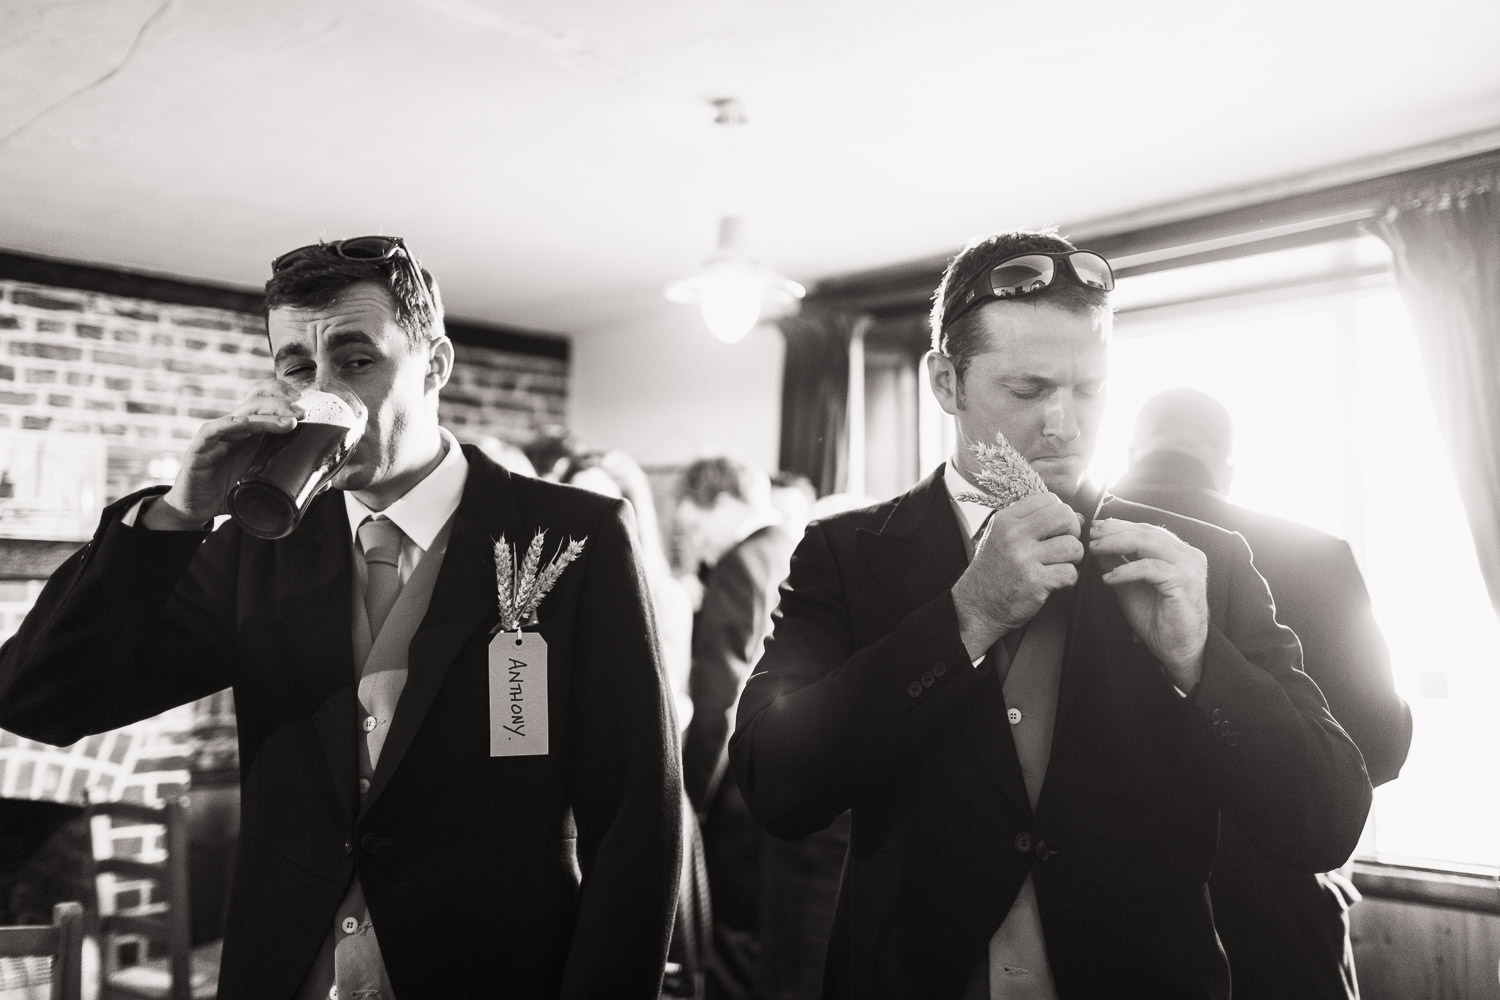 Groomsmen in the The Green Man Inn in Bradwell-on-Sea. One man is drinking a pint, the other is fixing his buttonhole, which is made of ears of wheat. They have sunglasses on their heads.